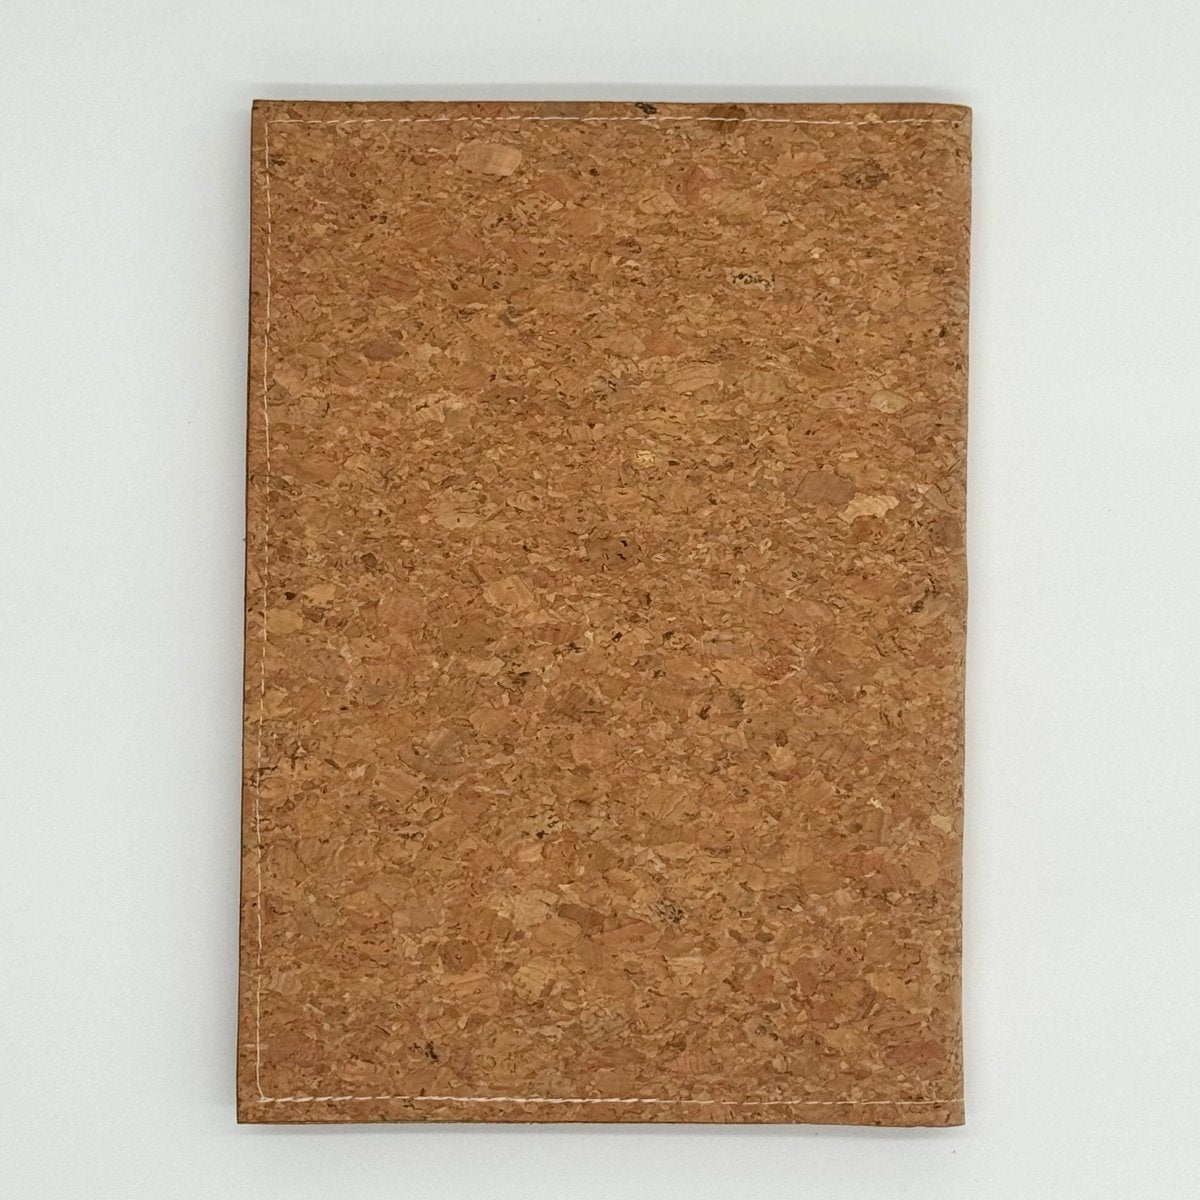 Embroidered or Engraved Cork Leather Notebook Cover with Refillable Notepad - Small -NTPDCVR-0002 - Texas Cork Company